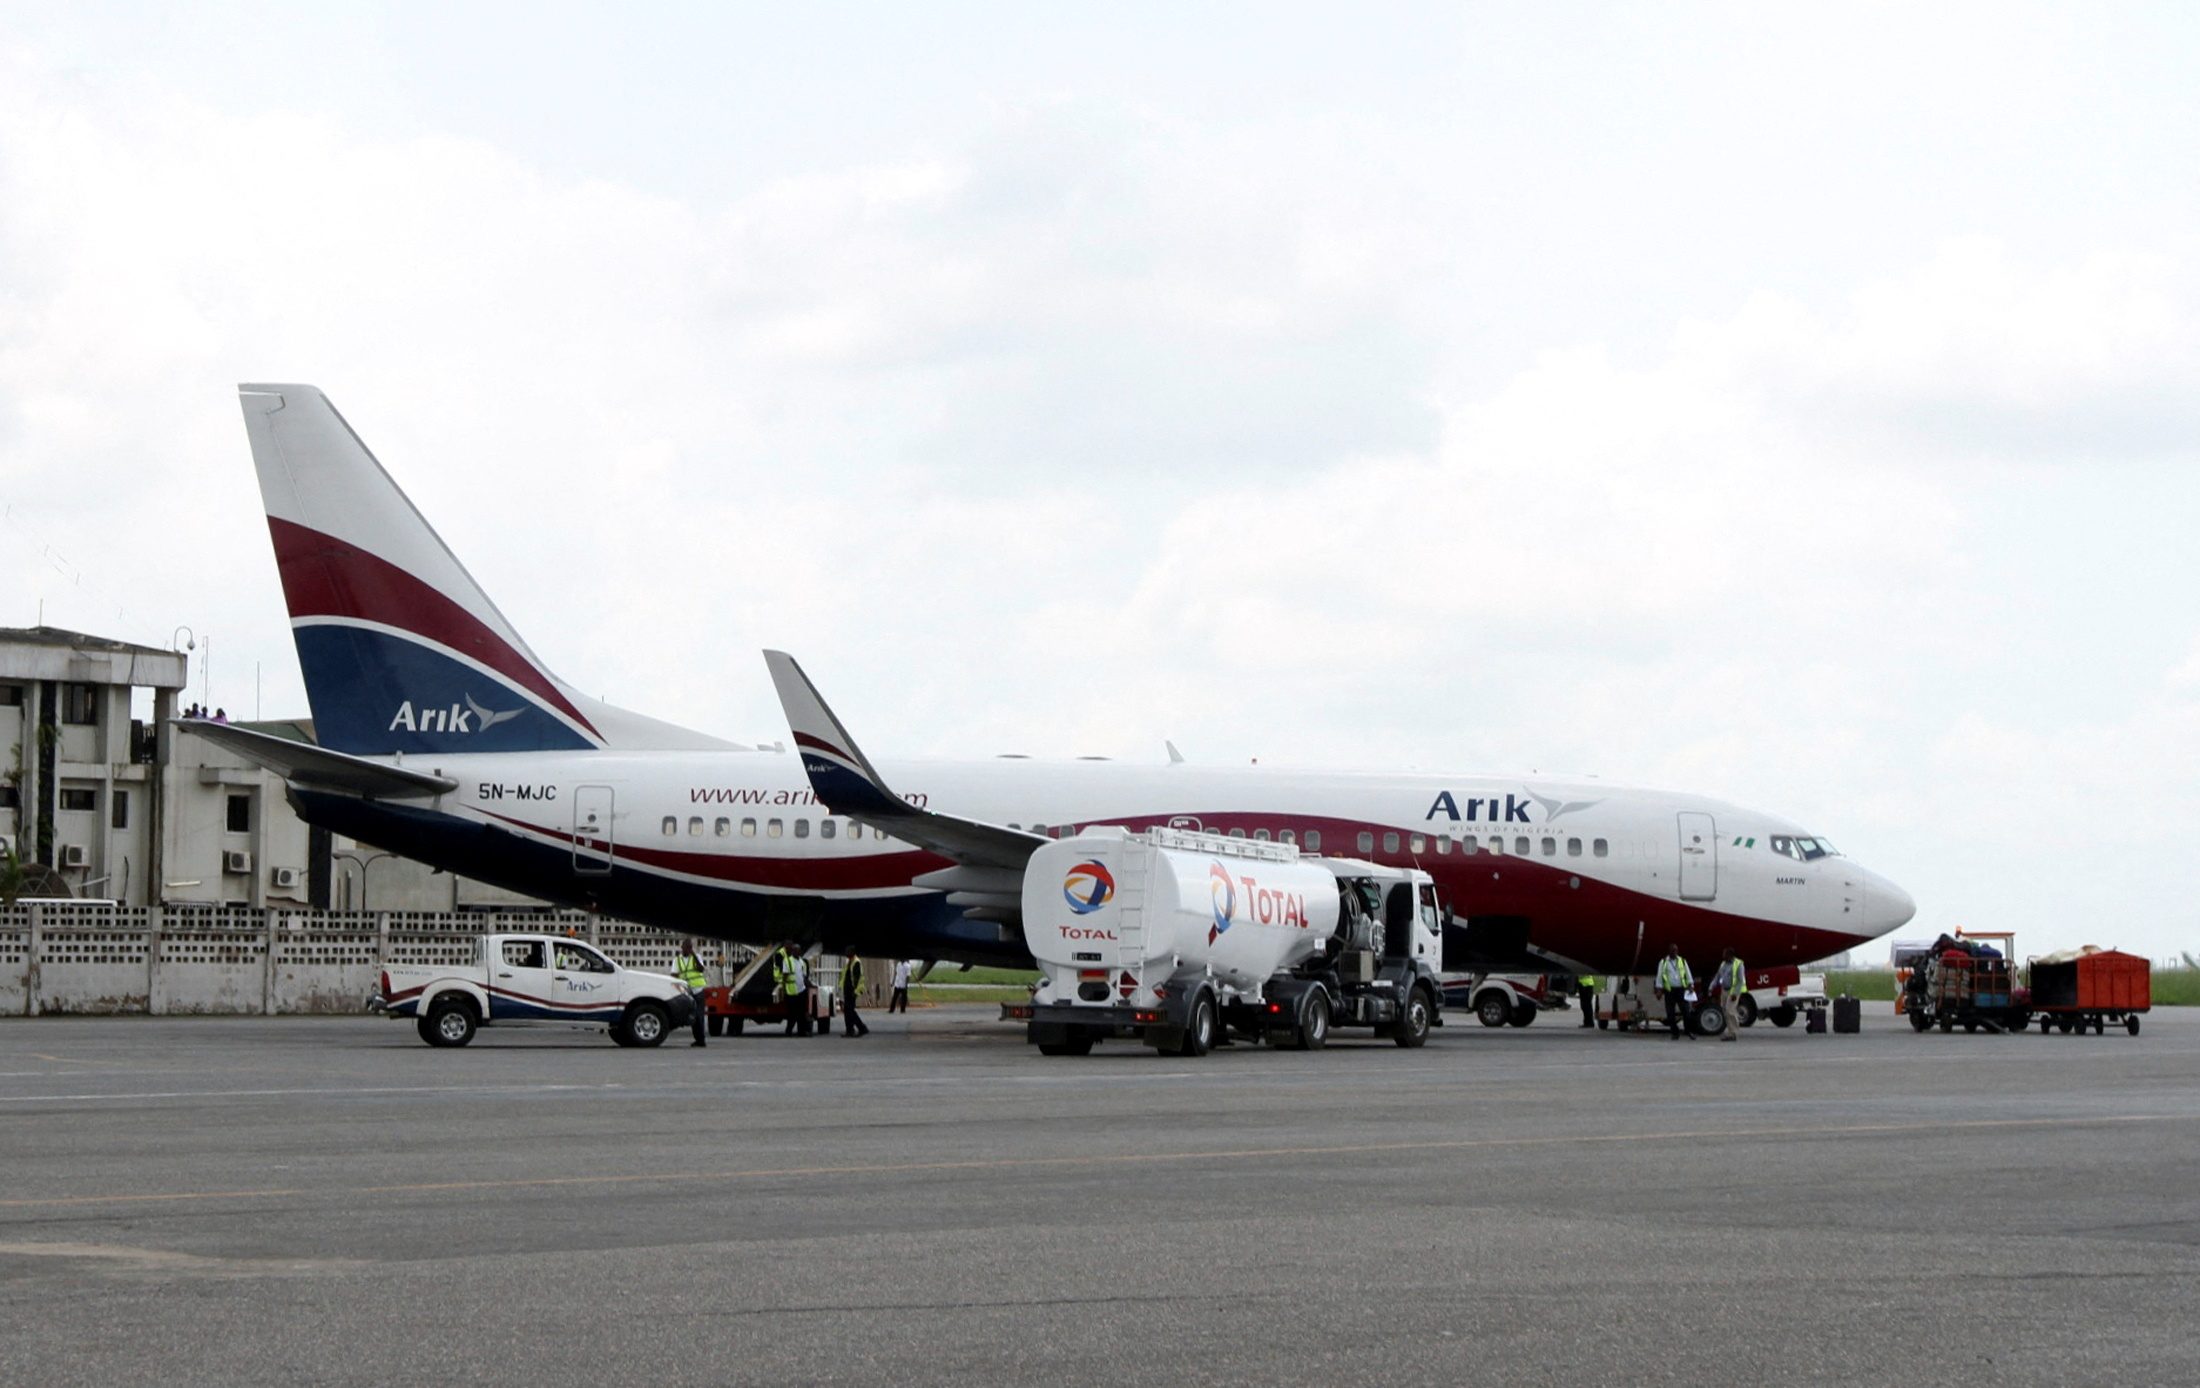 Nigeria’s airlines may not survive jet fuel price rise – operators